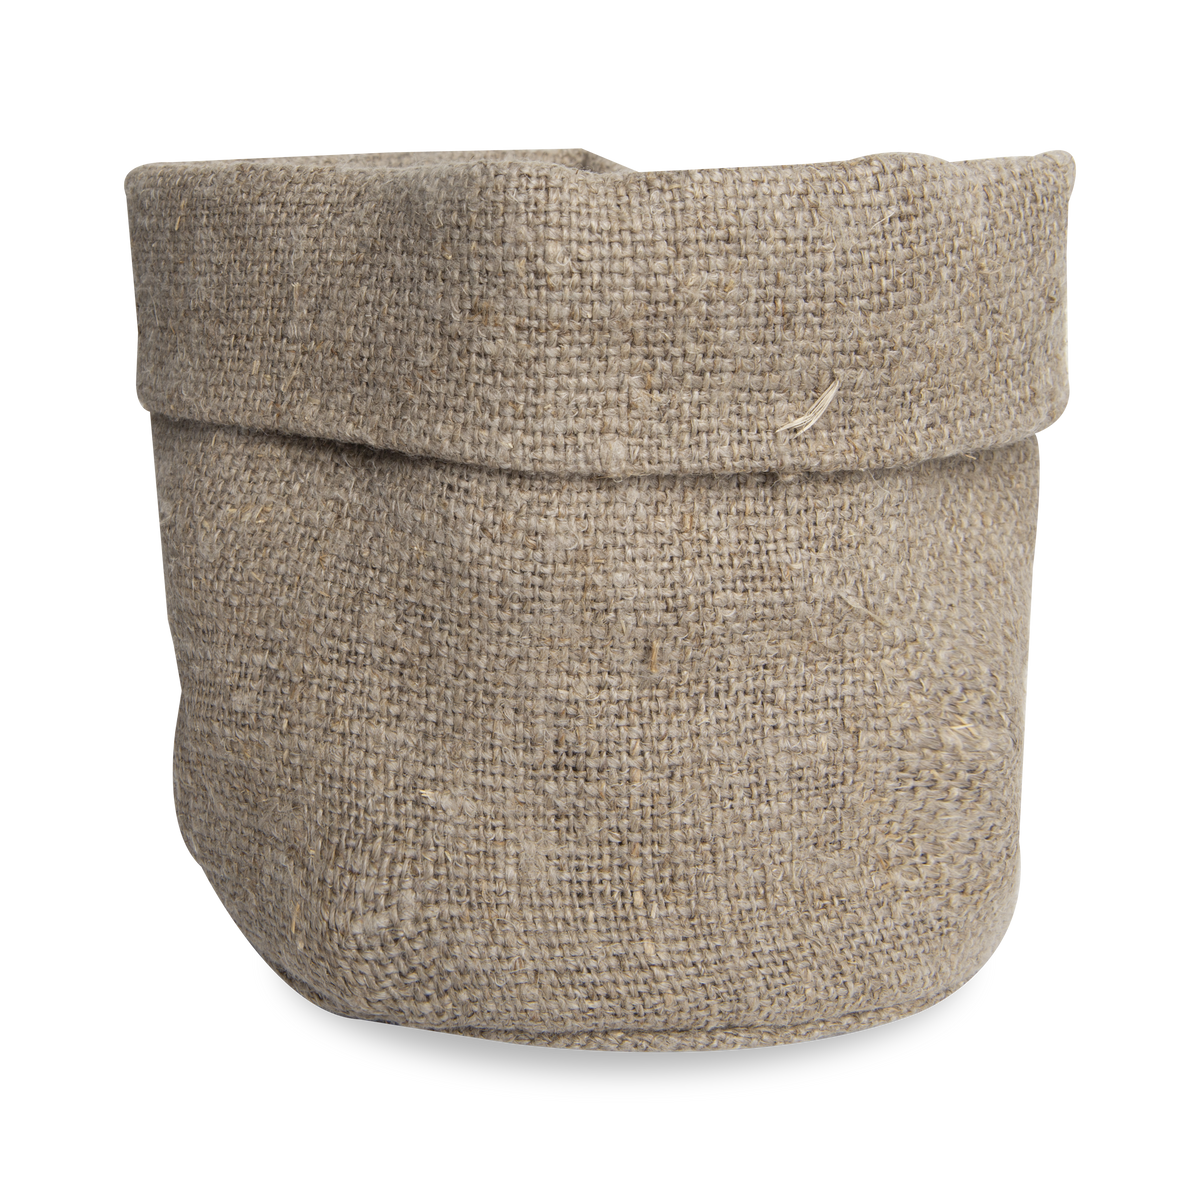 This simple style rough linen basket holds its shape.